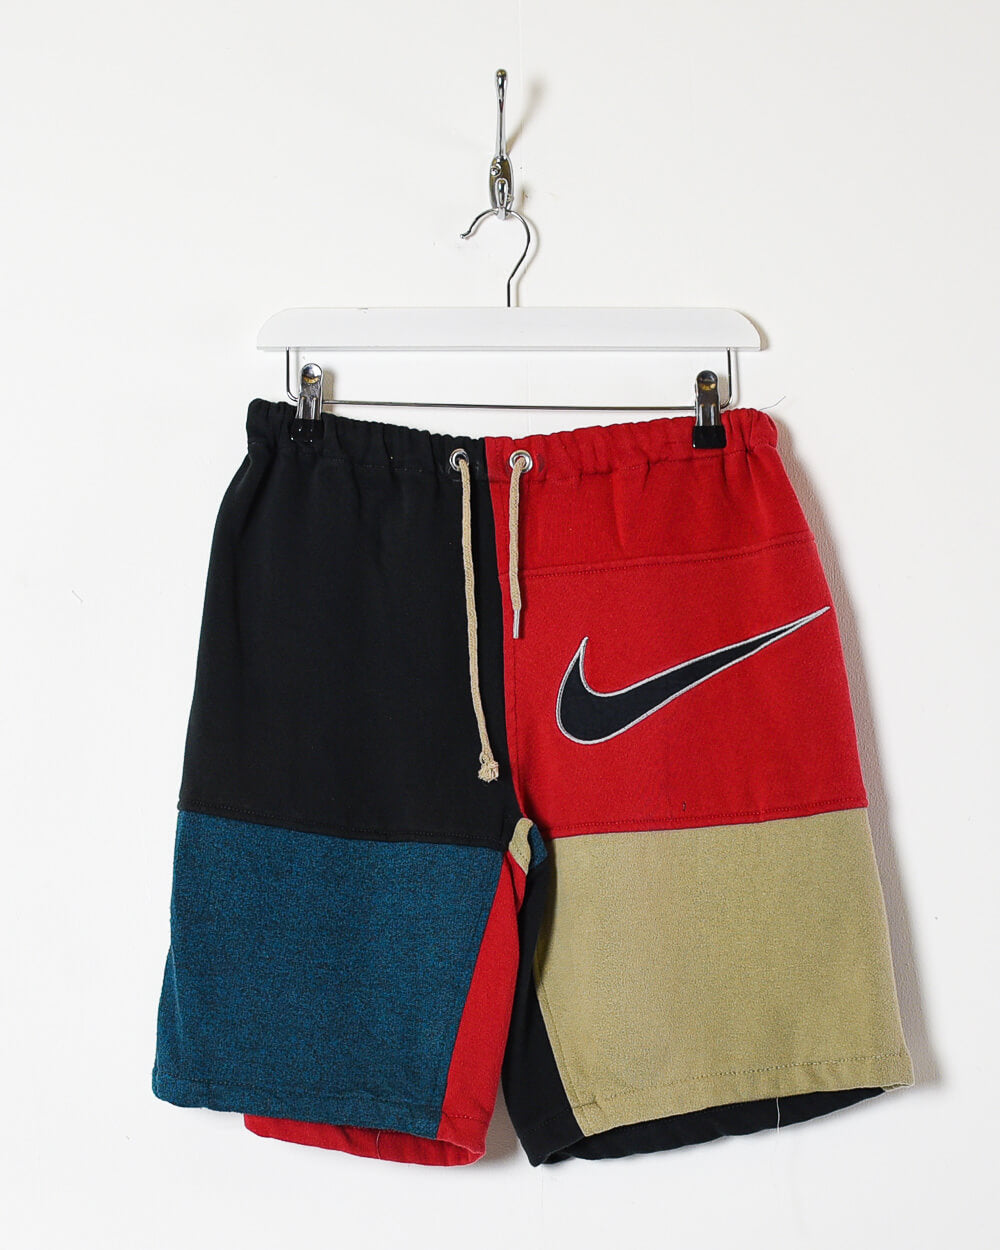 Red Nike Reworked Shorts - W32